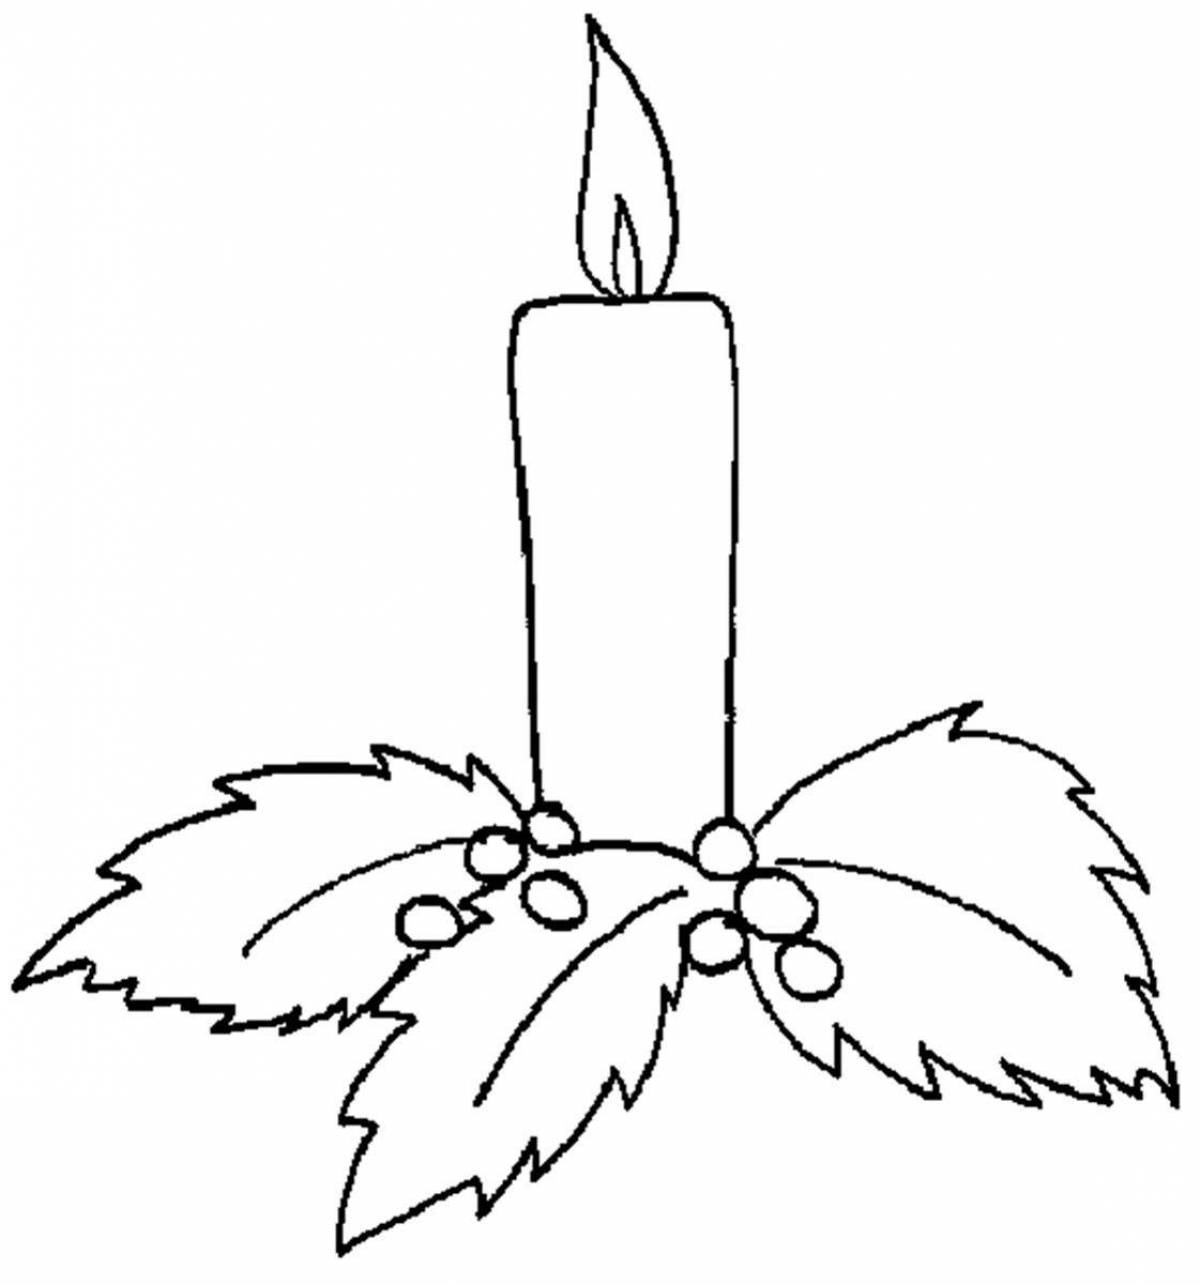 Coloring book spellbinding Christmas candle